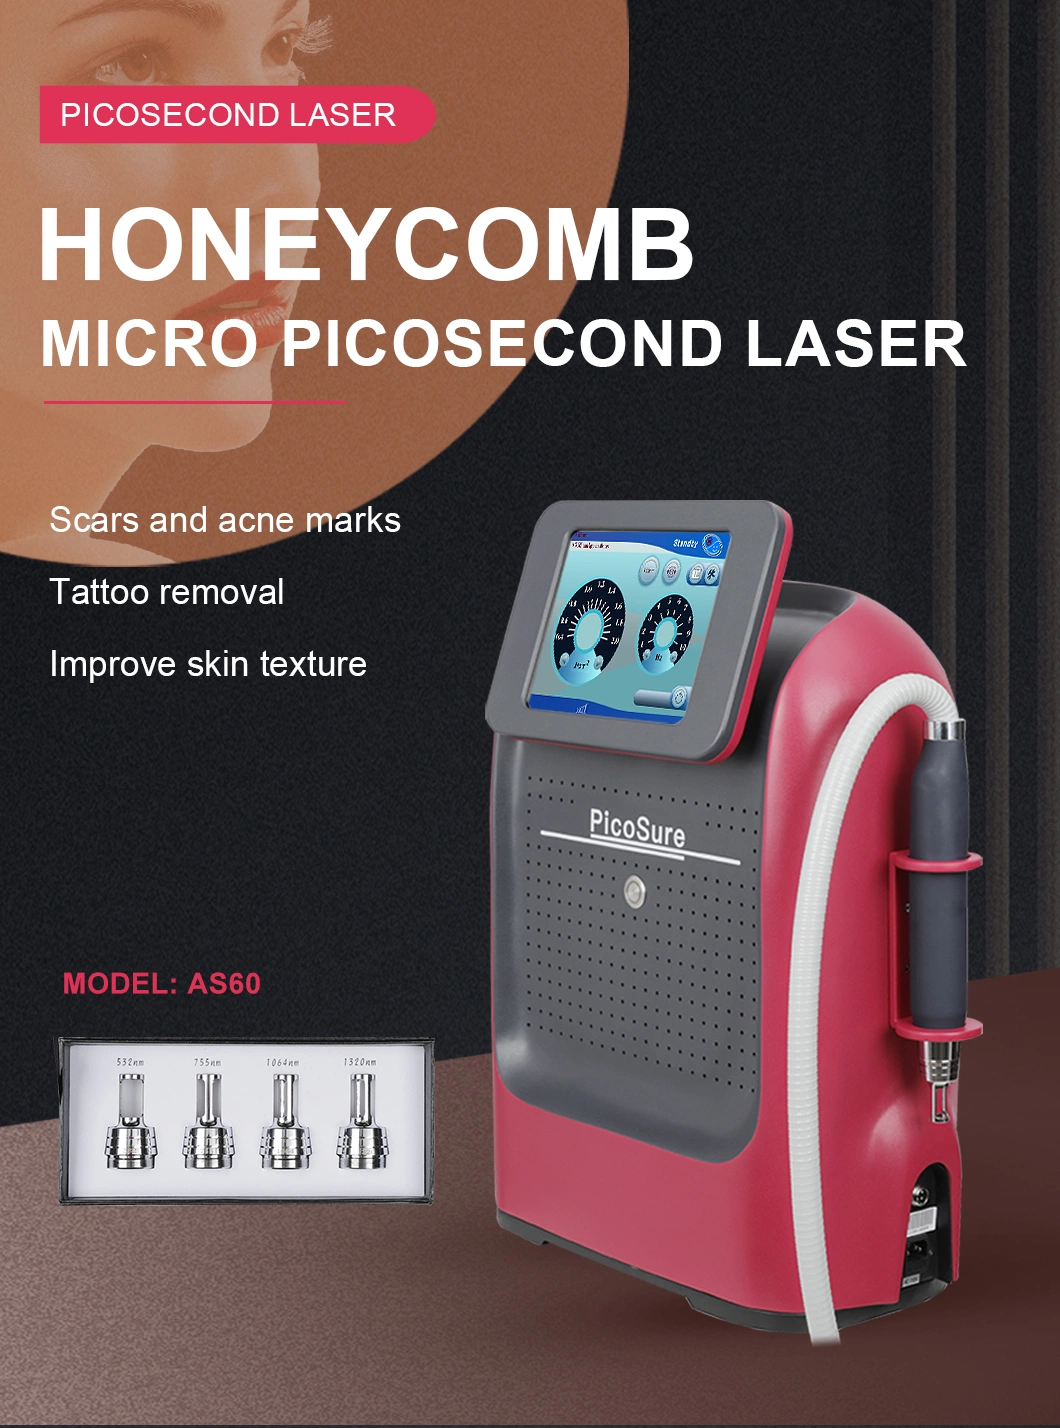 Laser Tattoo Removal ND YAG Machine for Beauty Salon Equipment